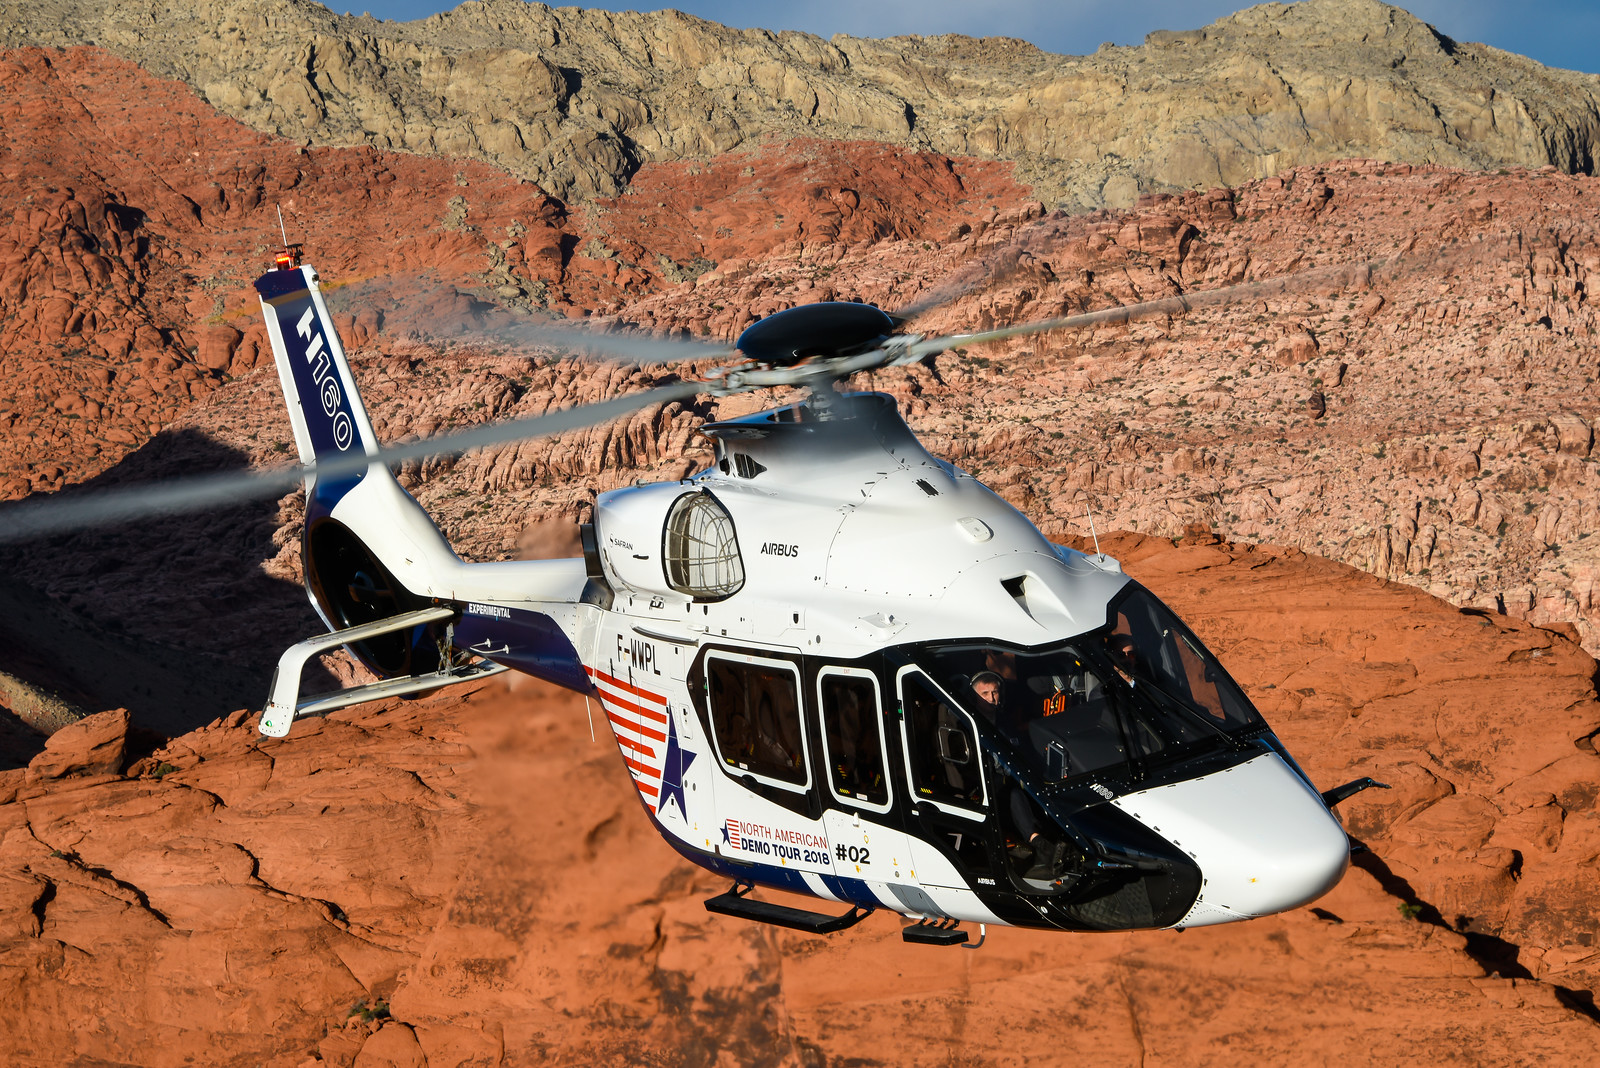 An undisclosed North American company has become the launch H160 customer in the U.S., with an order for four aircraft.